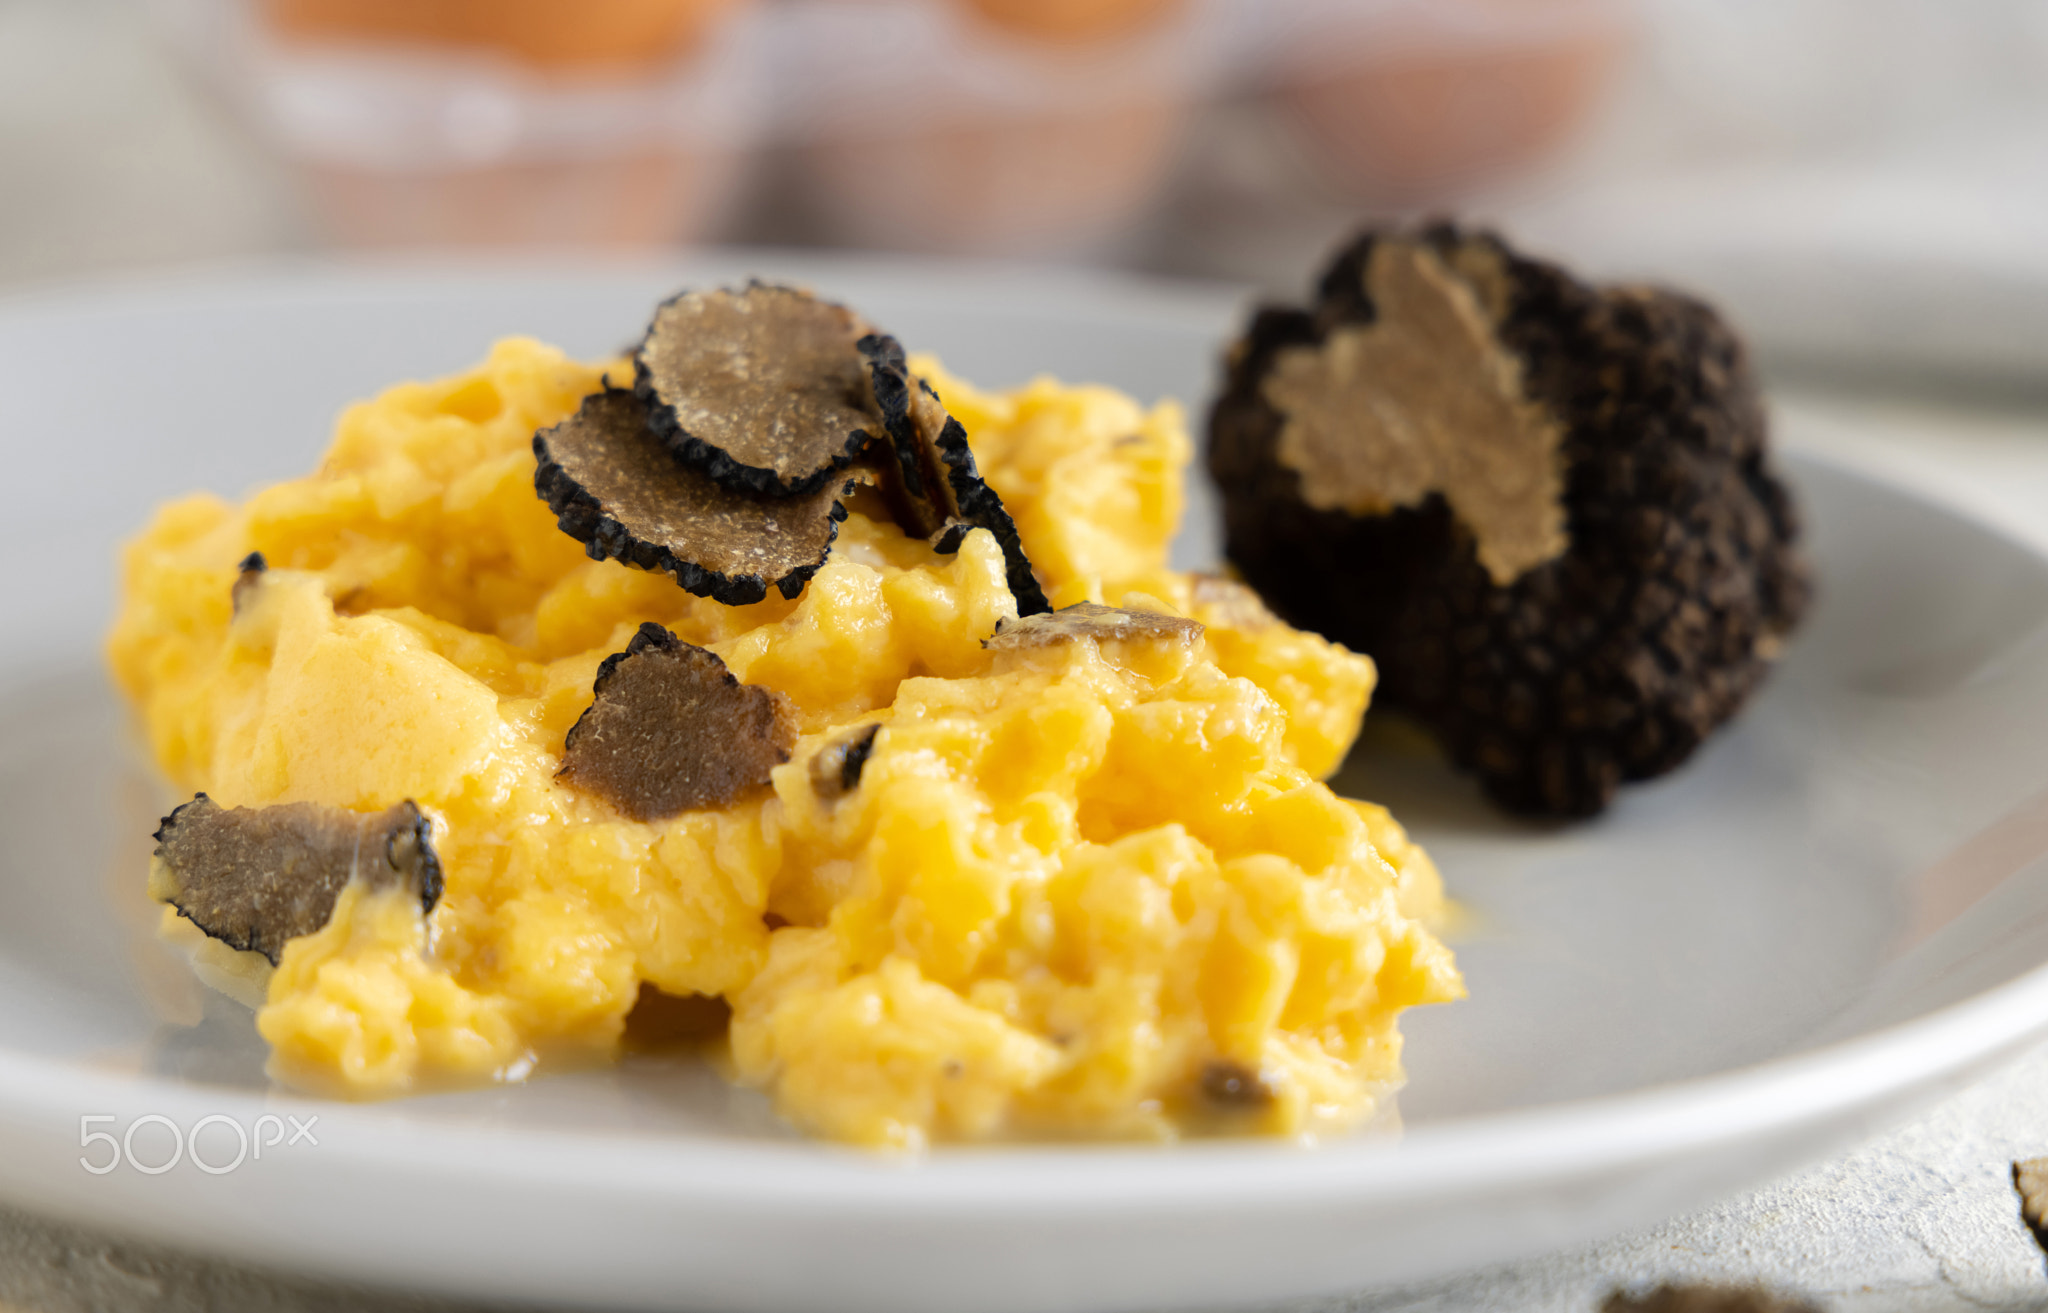 Scrambled eggs with fresh black truffles from Italy served in a plate close up, gourmet breakfast